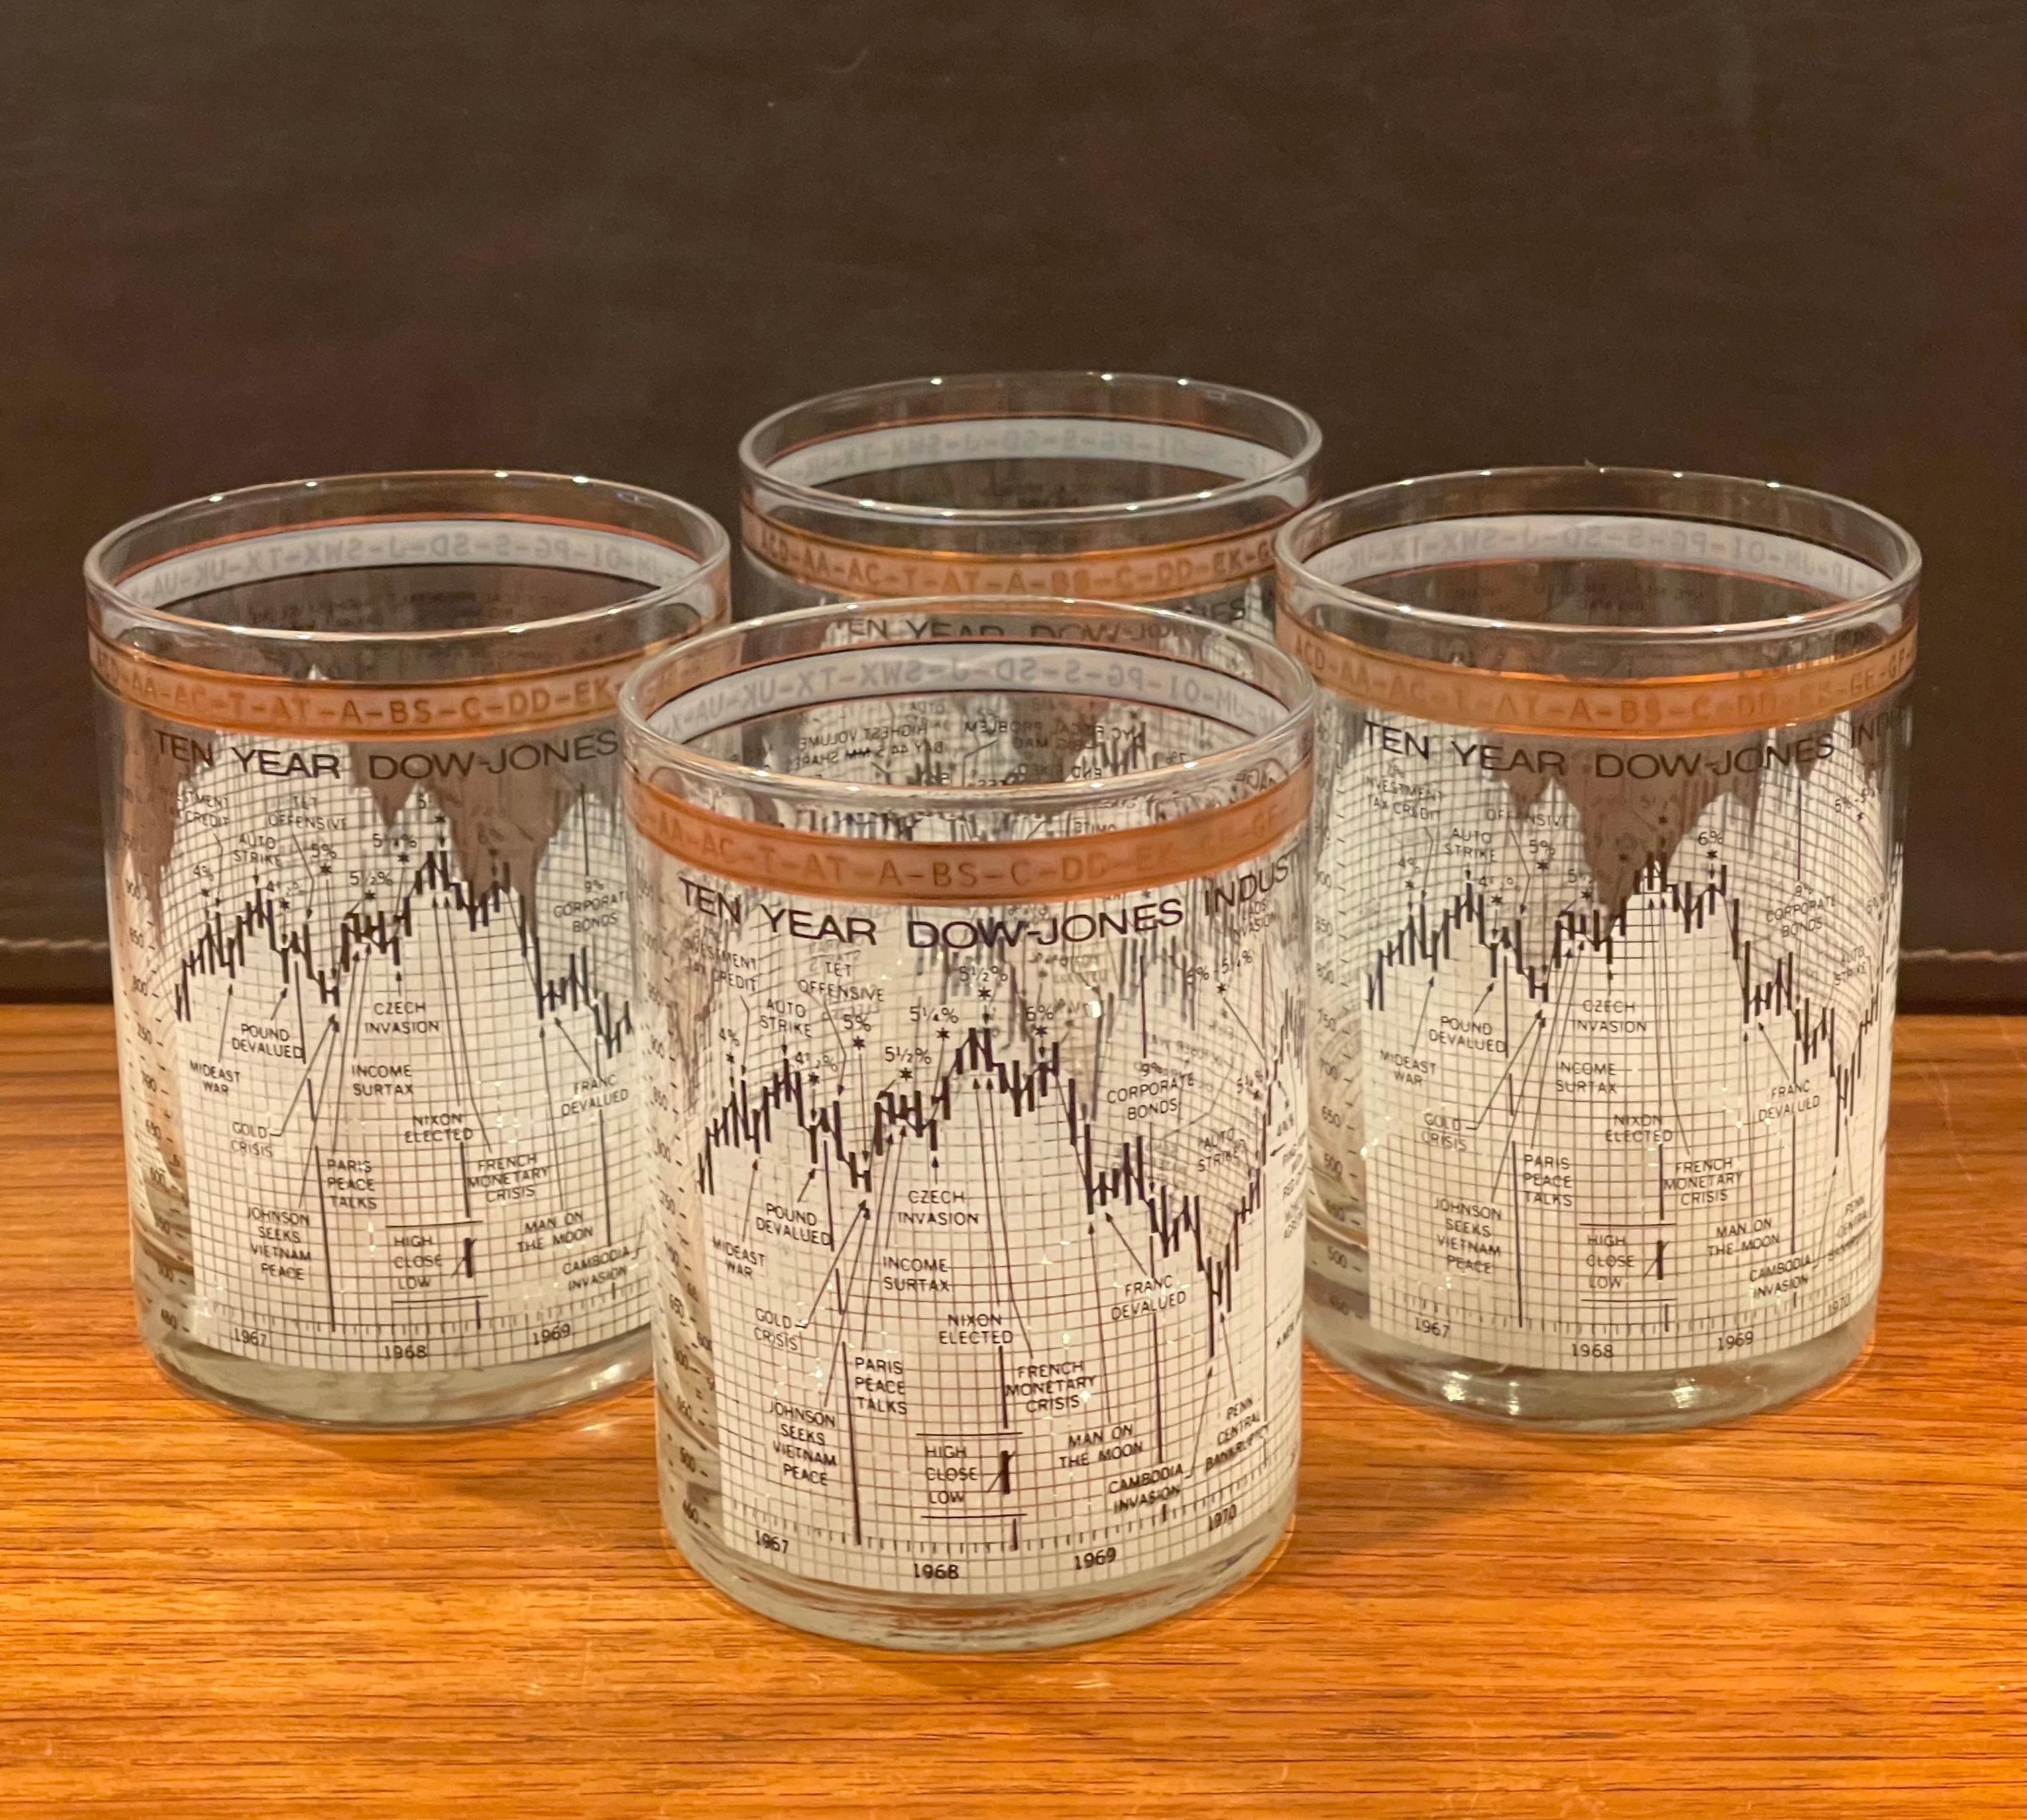 Great set of four double old fashioned glasses (14oz) tracking the Dow Jones Industrial Average (DJIA) from 1967 to 1978 by Cera, circa 1980s. Each glass is the same and captures 11 years of current events and their impact on the stock market. The